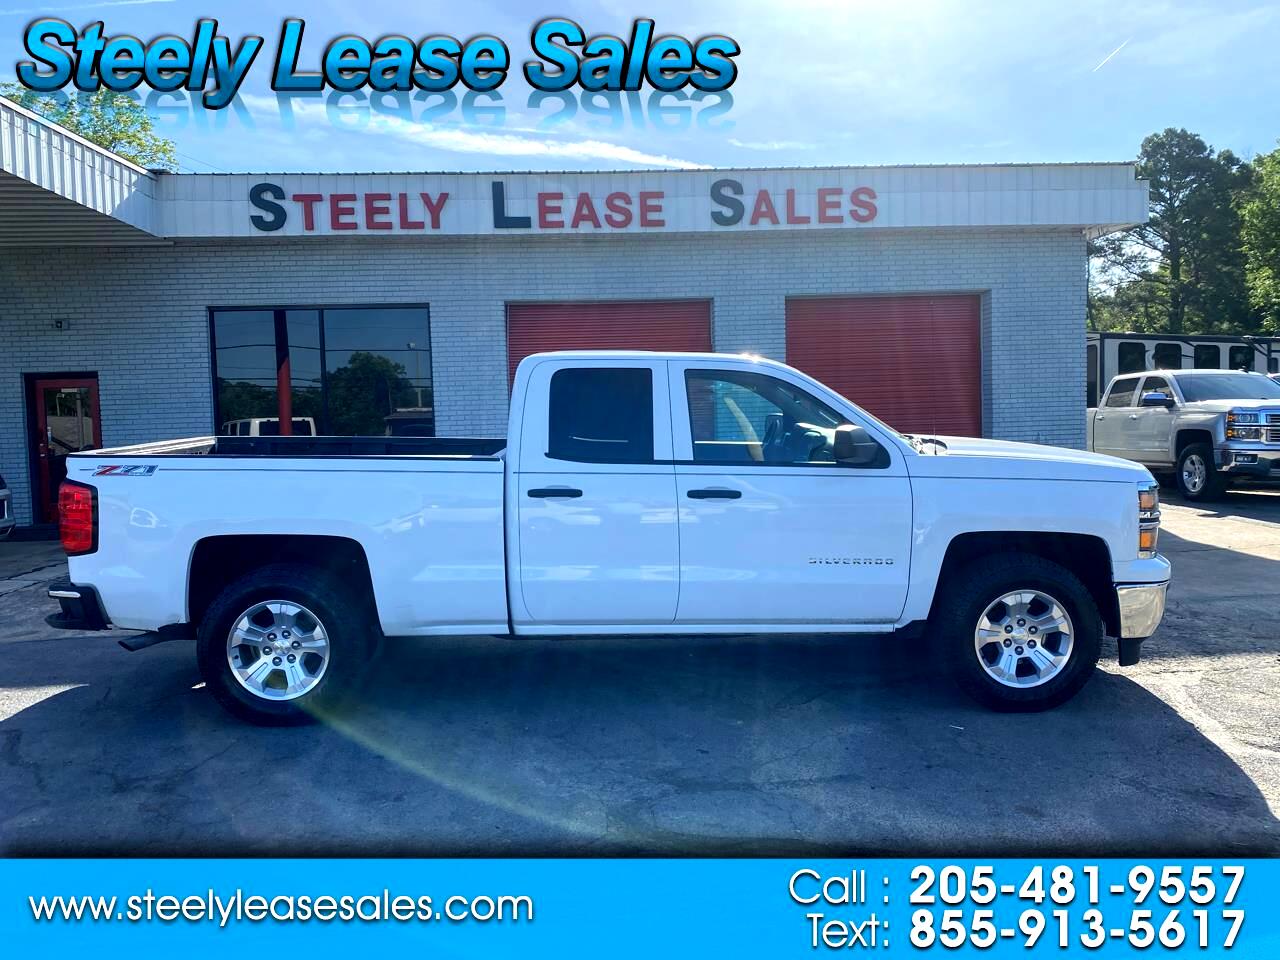 Used 14 Chevrolet Silverado 1500 4wd Double Cab 143 5 Lt W 2lt For Sale In Bessemer Al Steely Lease Sales